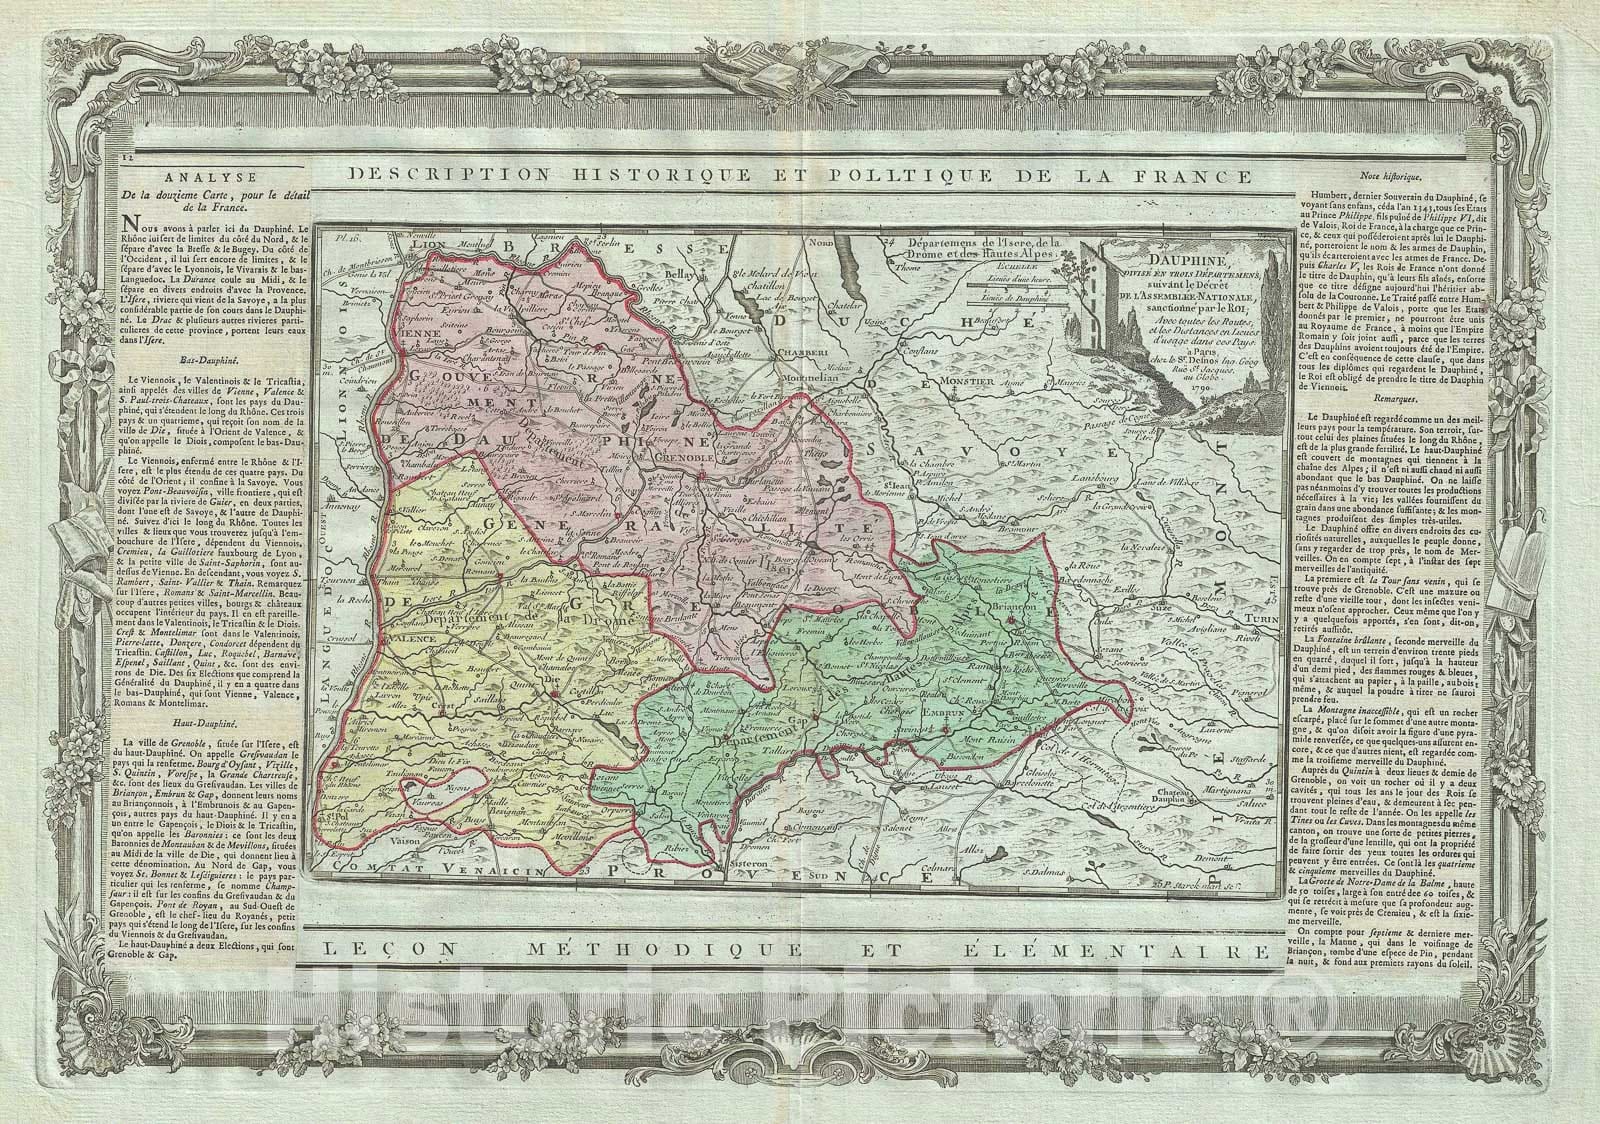 Historic Map : The Dauphine Region of France "French Riviera", Desnos, 1786, Vintage Wall Art